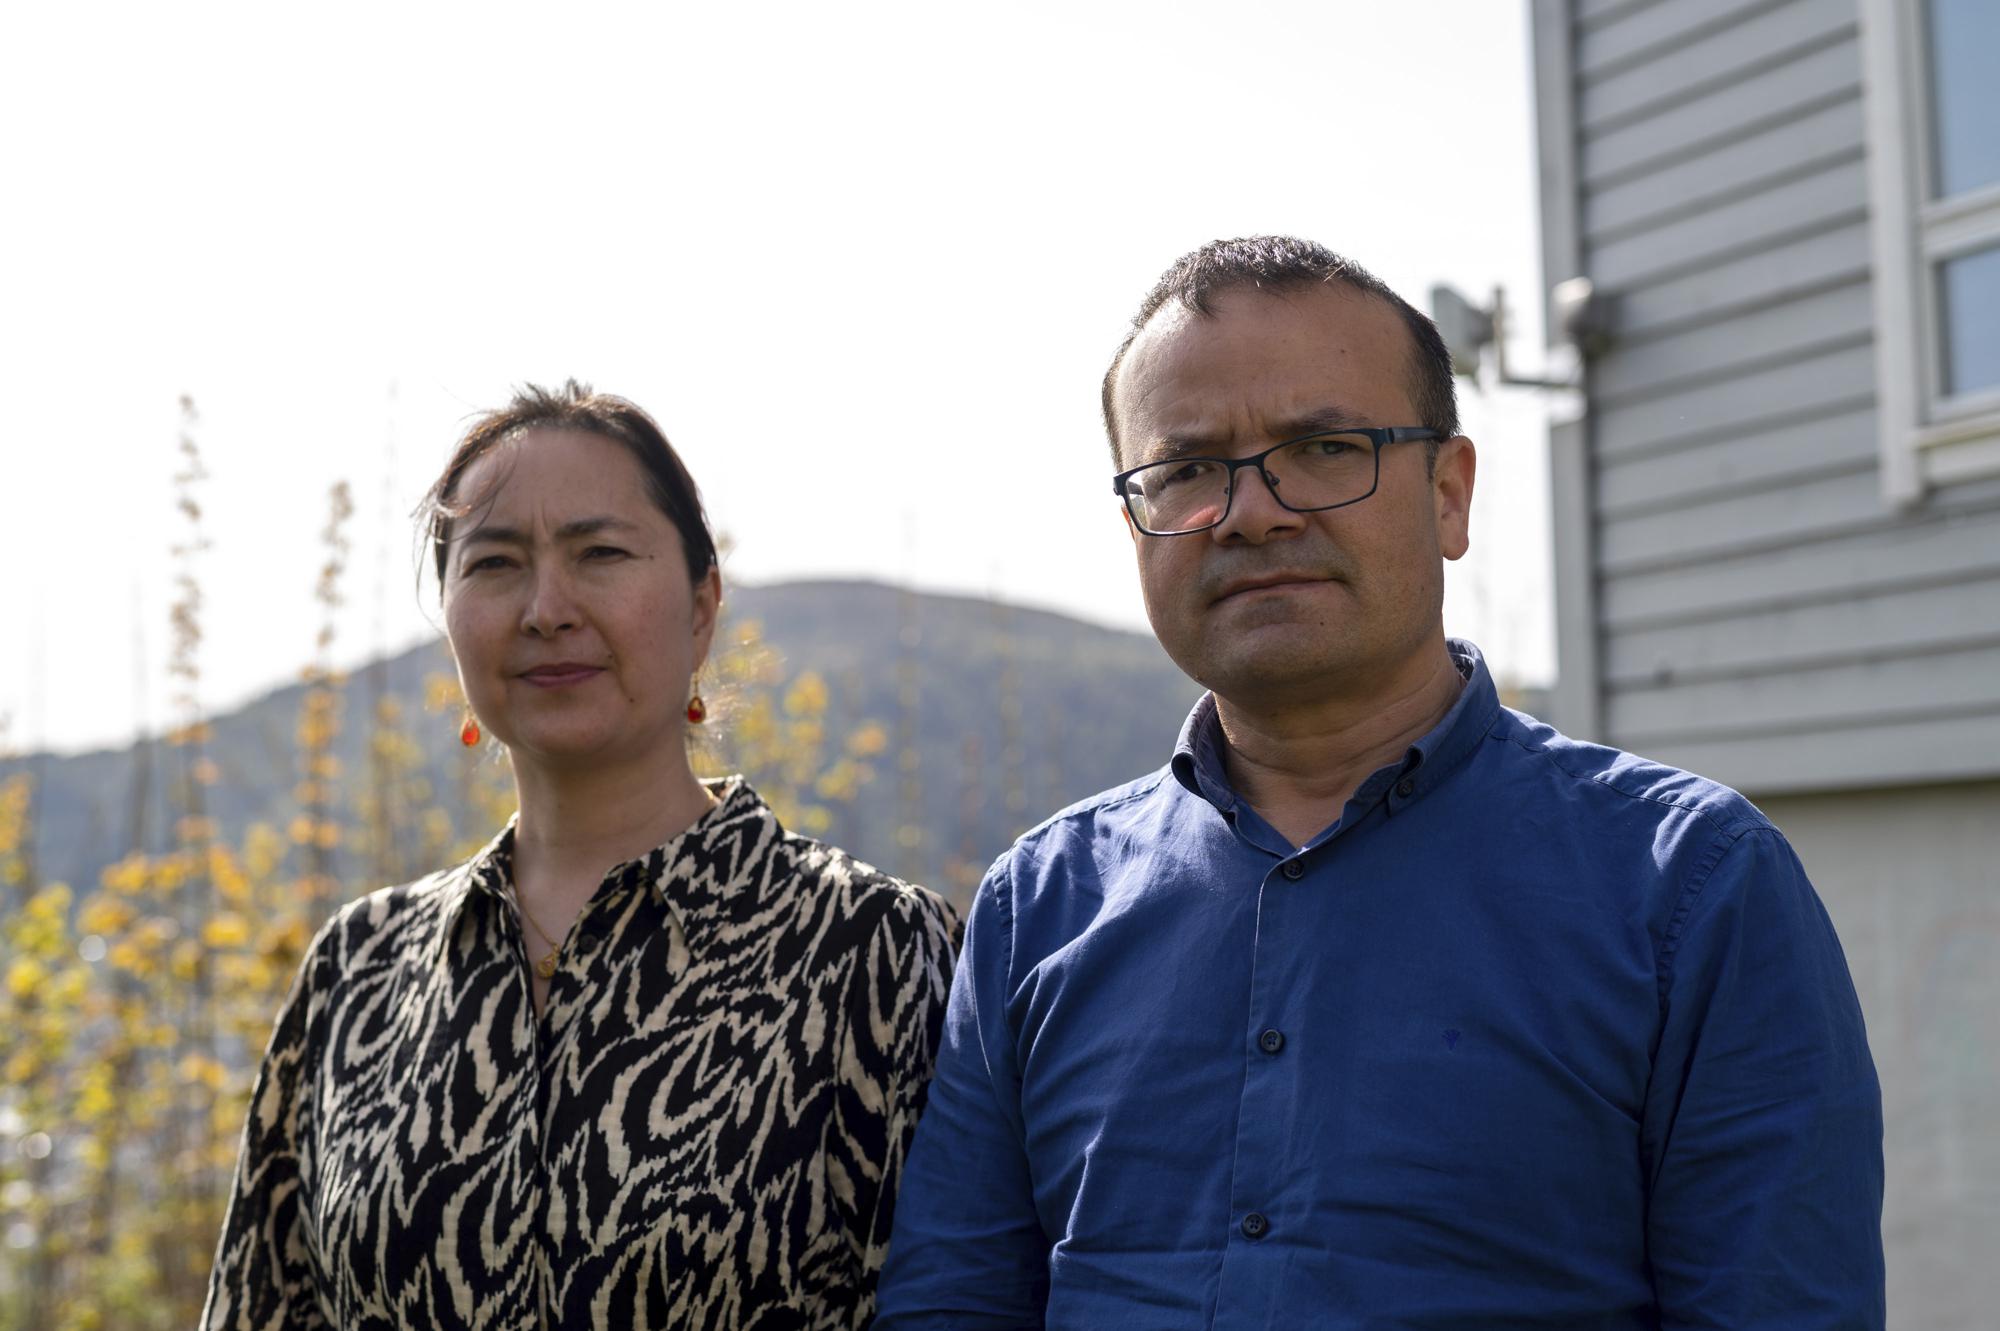 Uyghur couple Mihrigul Musa, left, and Abduweli Ayup pose for a photograph in their yard in Bergen, Norway on May 8, 2022. Nearly one in 25 people in a county in the Uyghur heartland of China has been sentenced to prison on terrorism-related charges, in what is the highest known imprisonment rate in the world, an Associated Press review of leaked data shows. Ayup and Musa knew friends and relatives sentenced to prison according to the list. (AP Photo/Paul Johannessen)